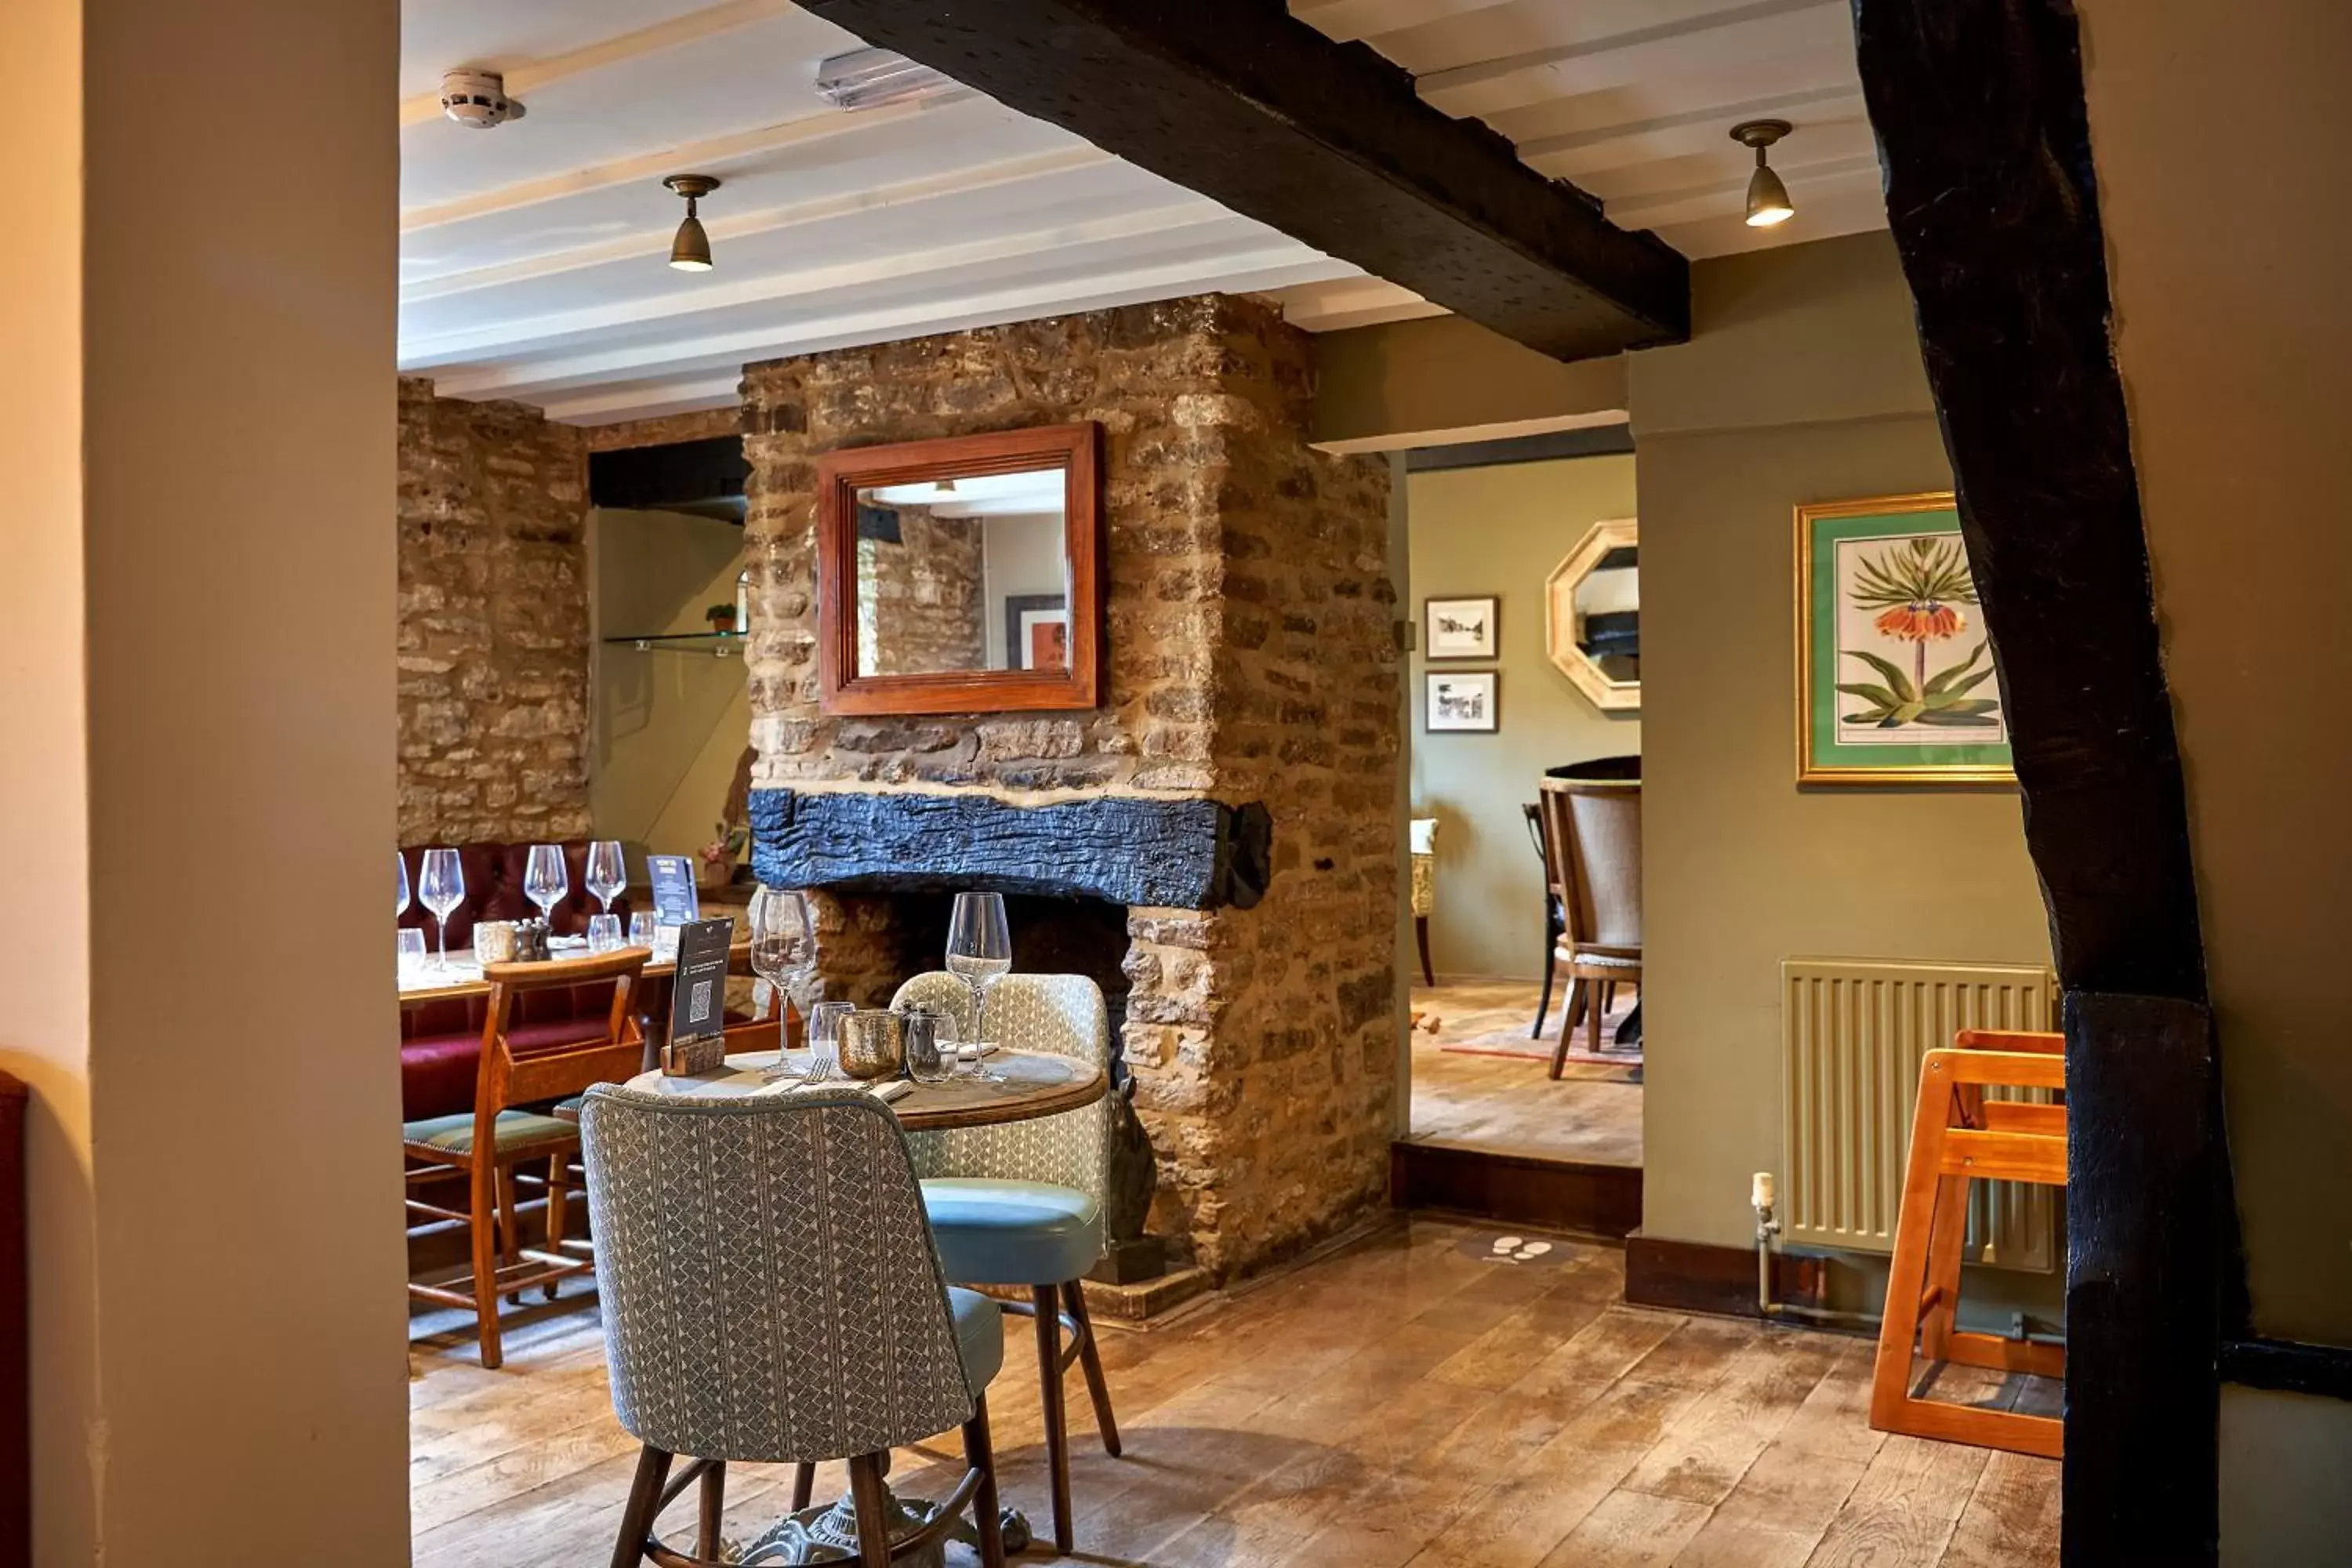 Restaurant/places to eat in The Horse And Groom Inn